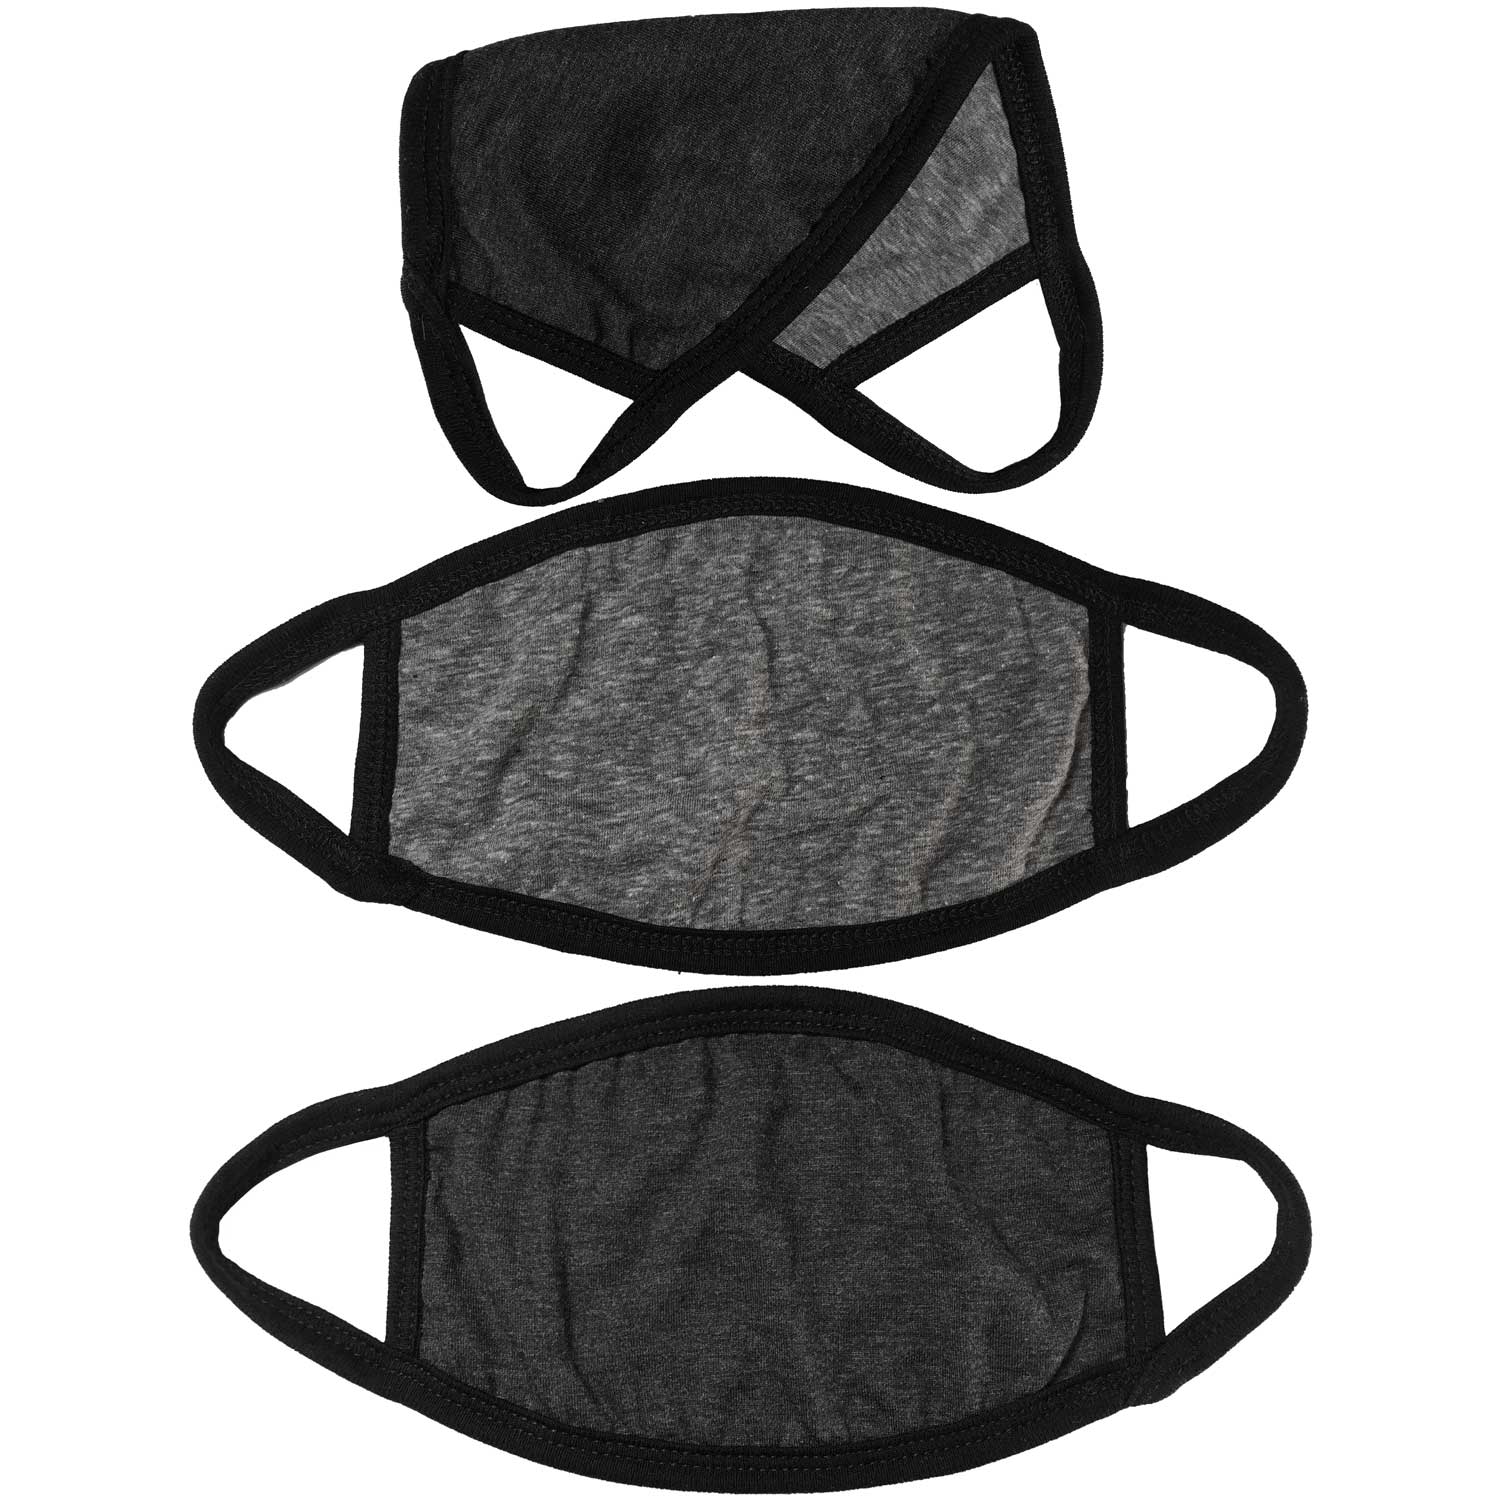 Unisex 3 Layer Reversible Facemask with Ear Loops | Cool Retro Style Facemask